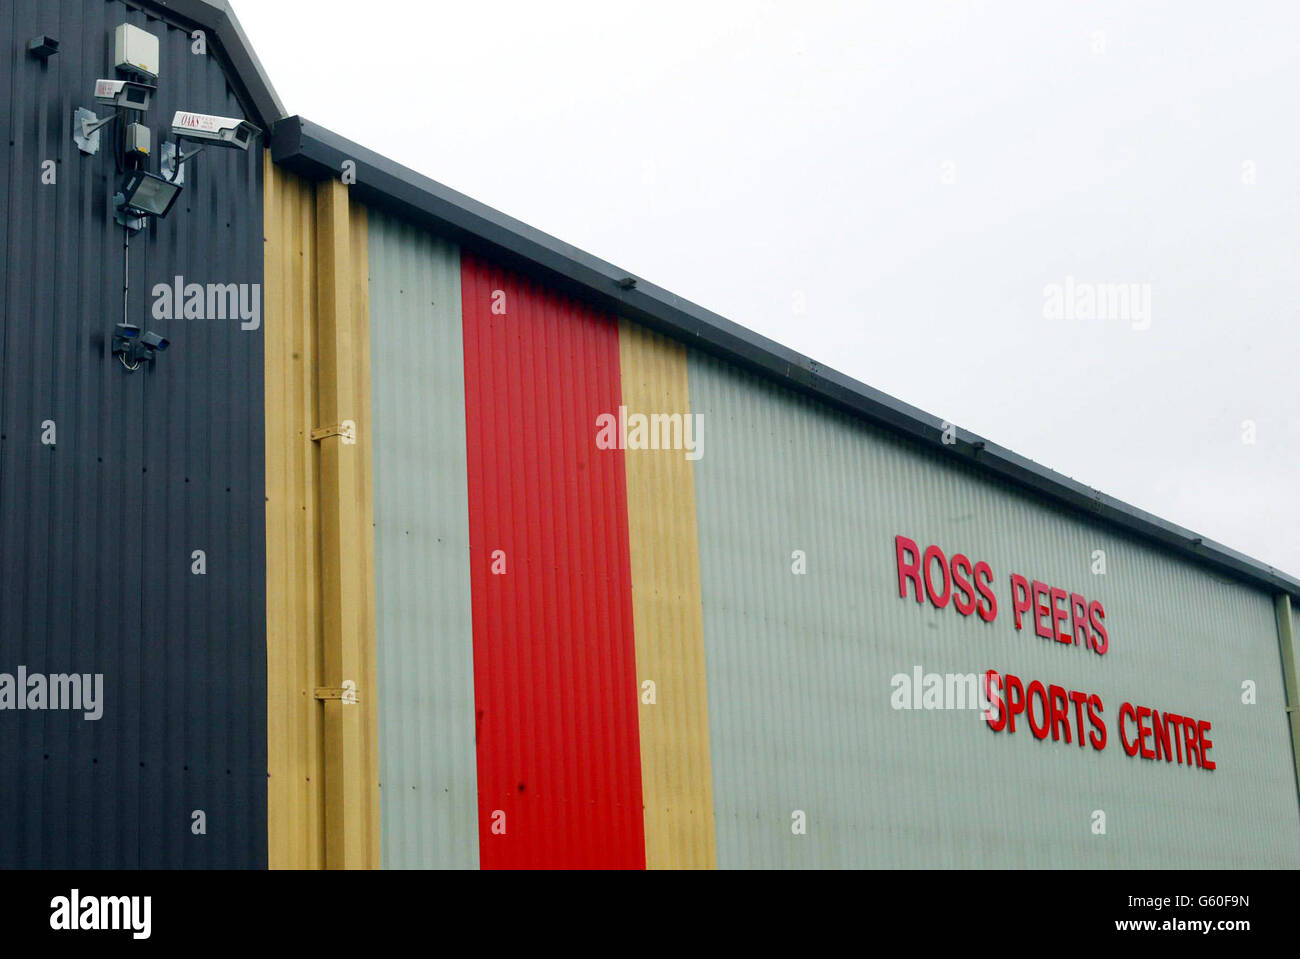 Ross Peers Sports centre Stock Photo